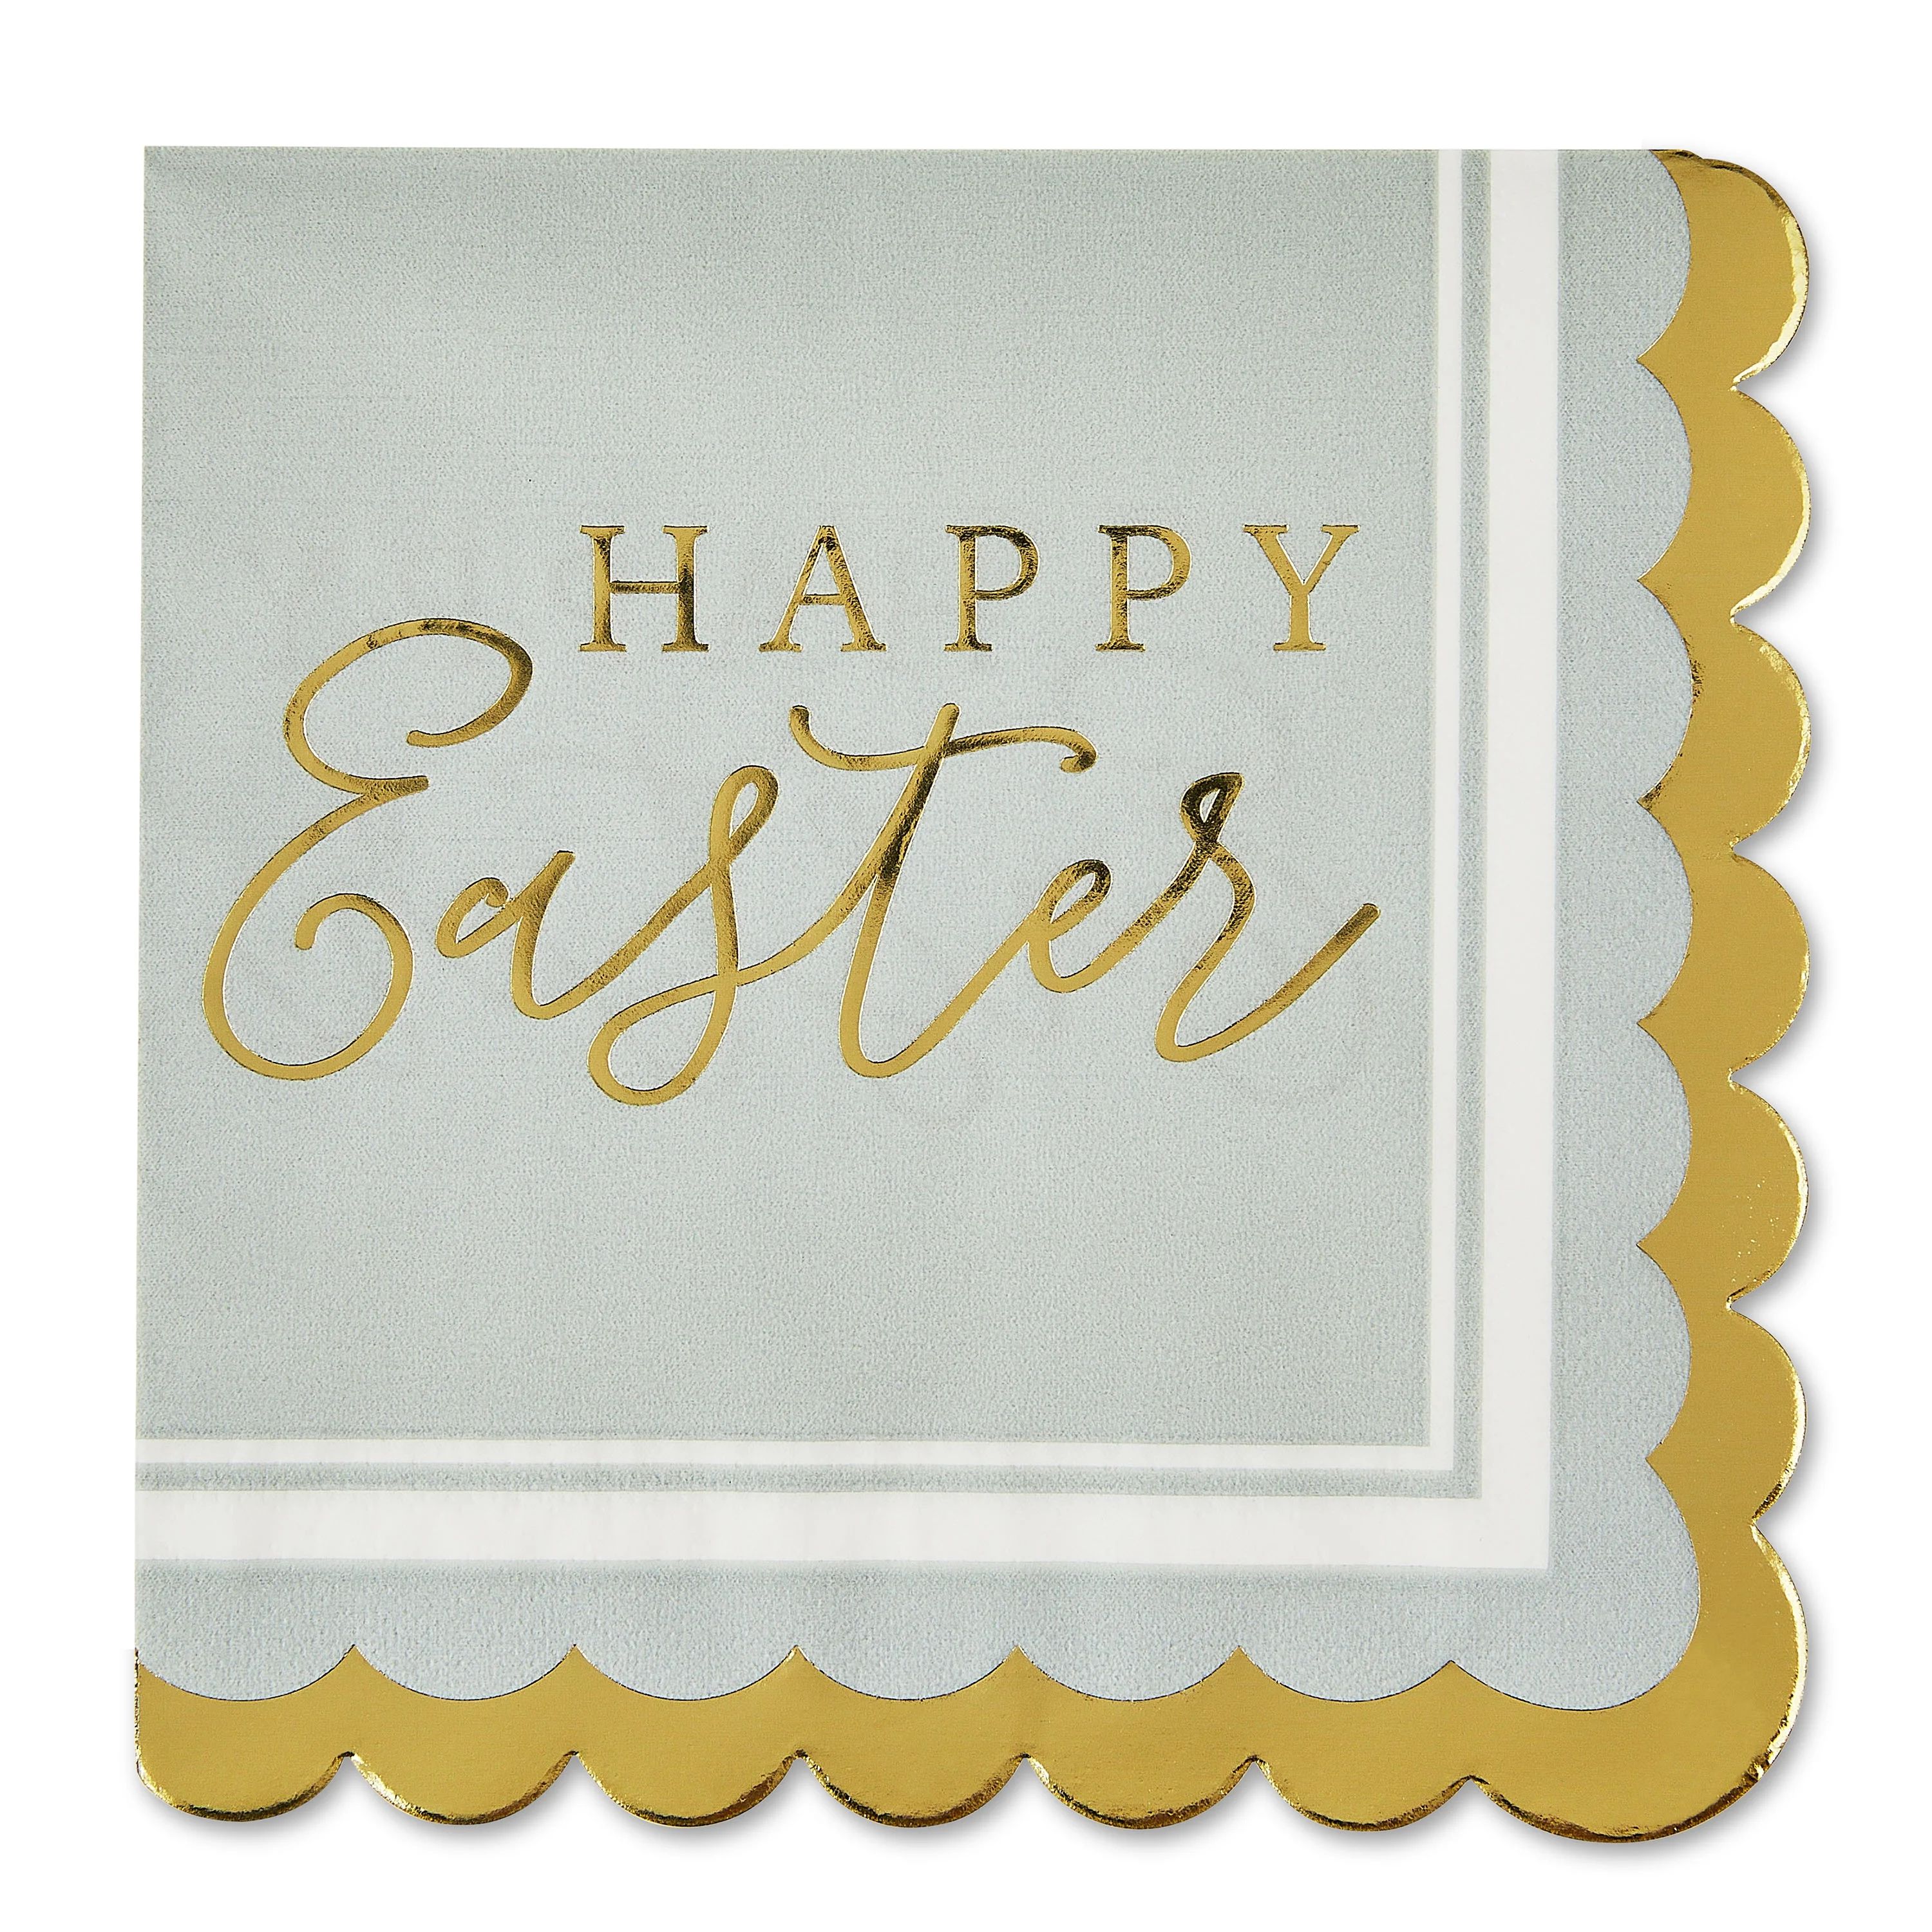 Happy Easter Lunch/Dessert Napkins, Gold Scallop Edge, Tissue,16 Count, by Way To Celebrate, Disp... | Walmart (US)